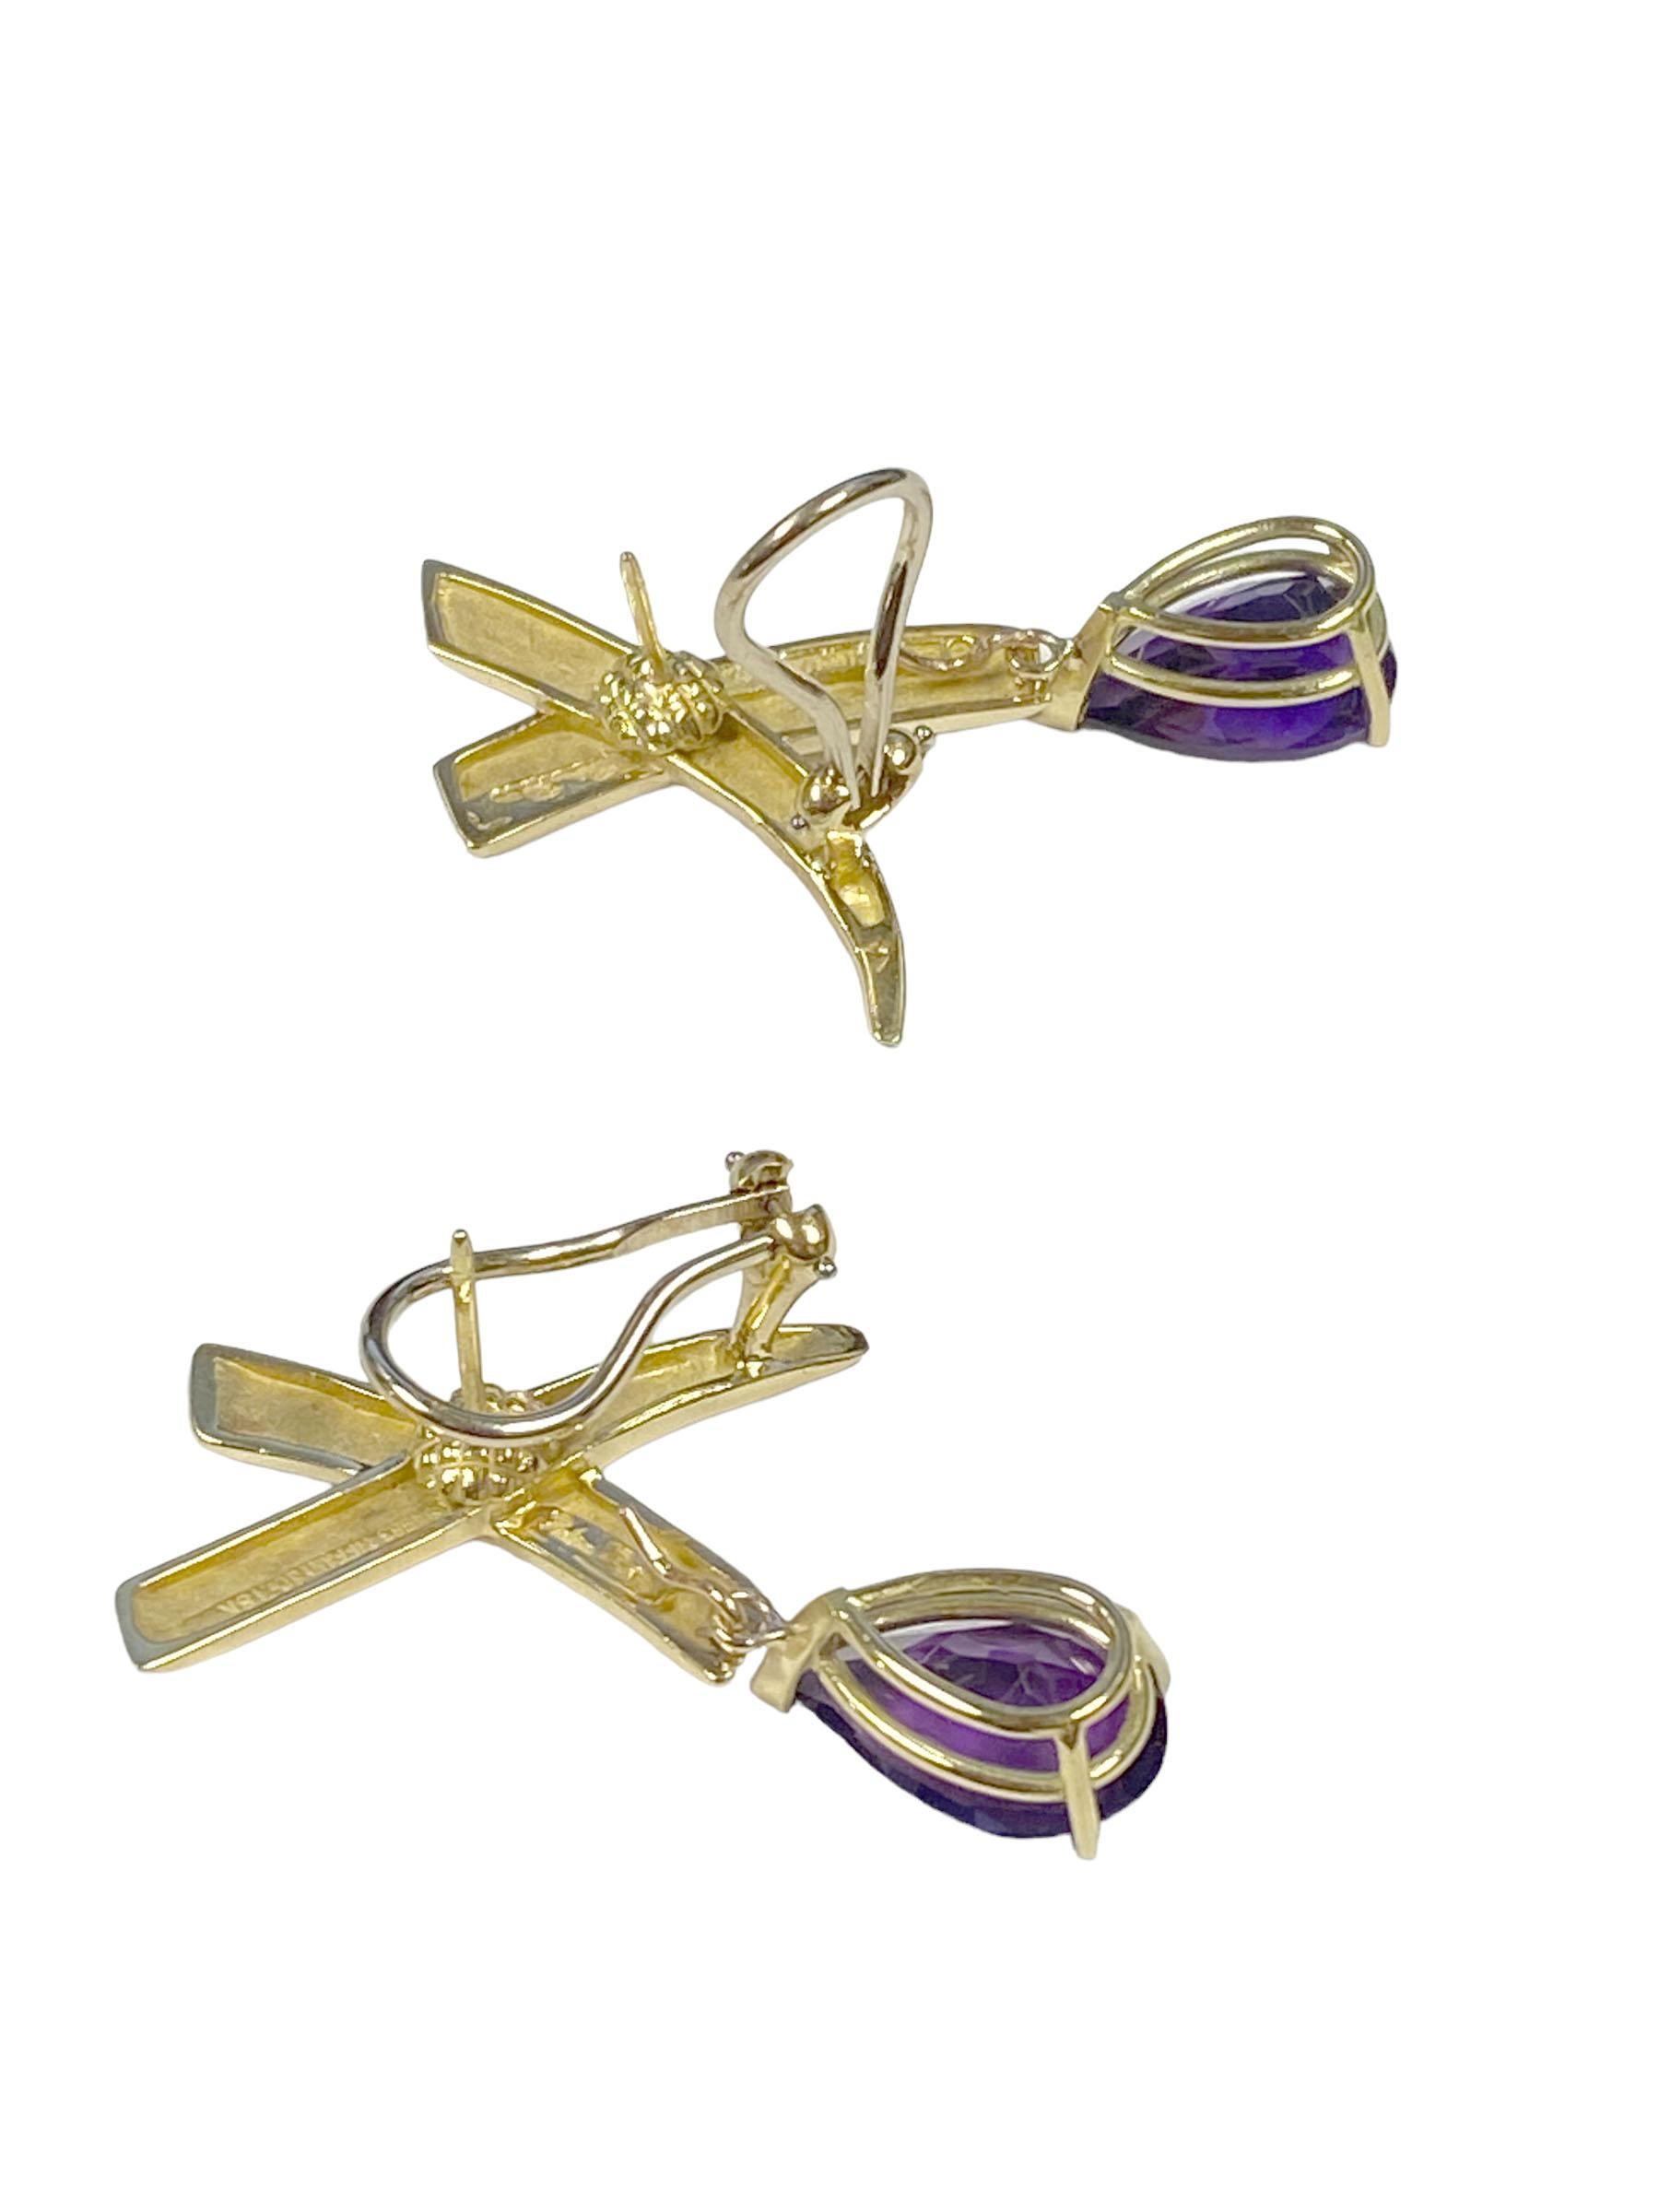 Circa 1990s Paloma Picasso for Tiffany & Company Graffiti collection 18k Yellow Gold Earrings with Detachable Amethyst Drops, measuring 1 5/8 inches in length, Very fine color Pear shape Amethyst drops approximately 4 carats each, Omega clip backs